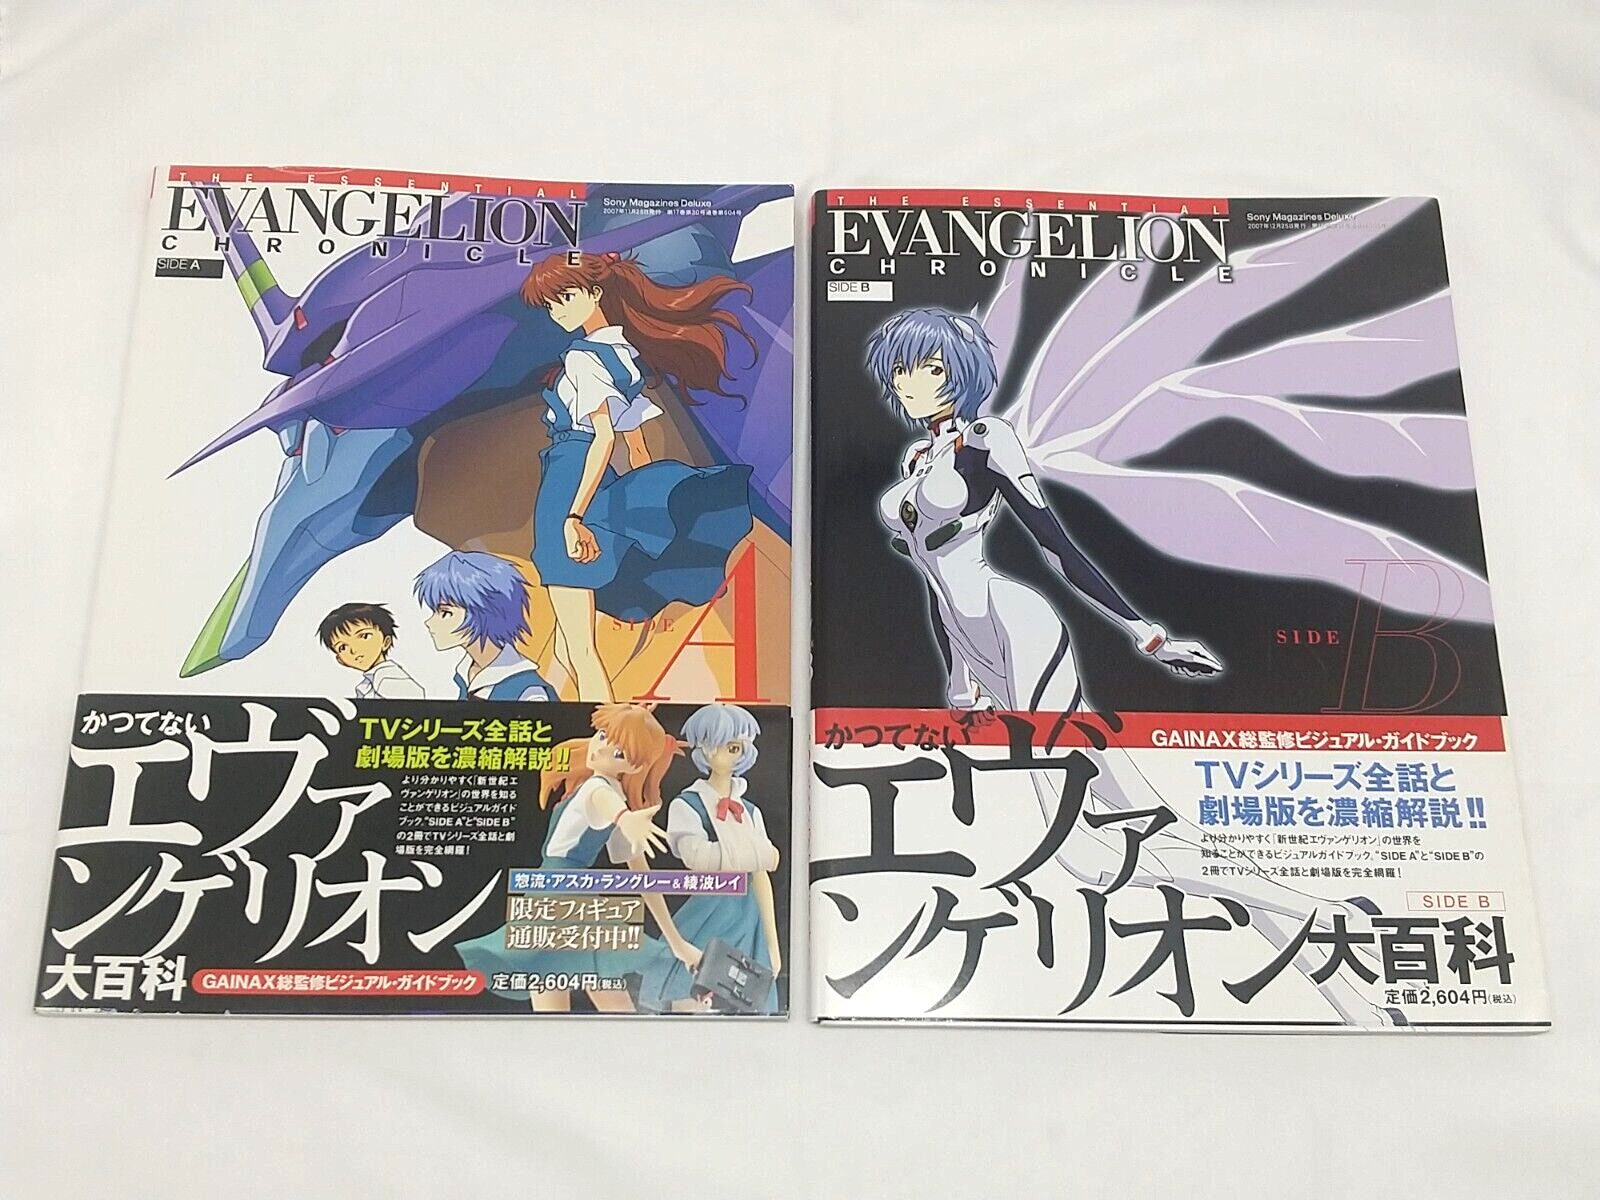 Evangelion Chronicle The Essential Side A & B Set Art Guide Book